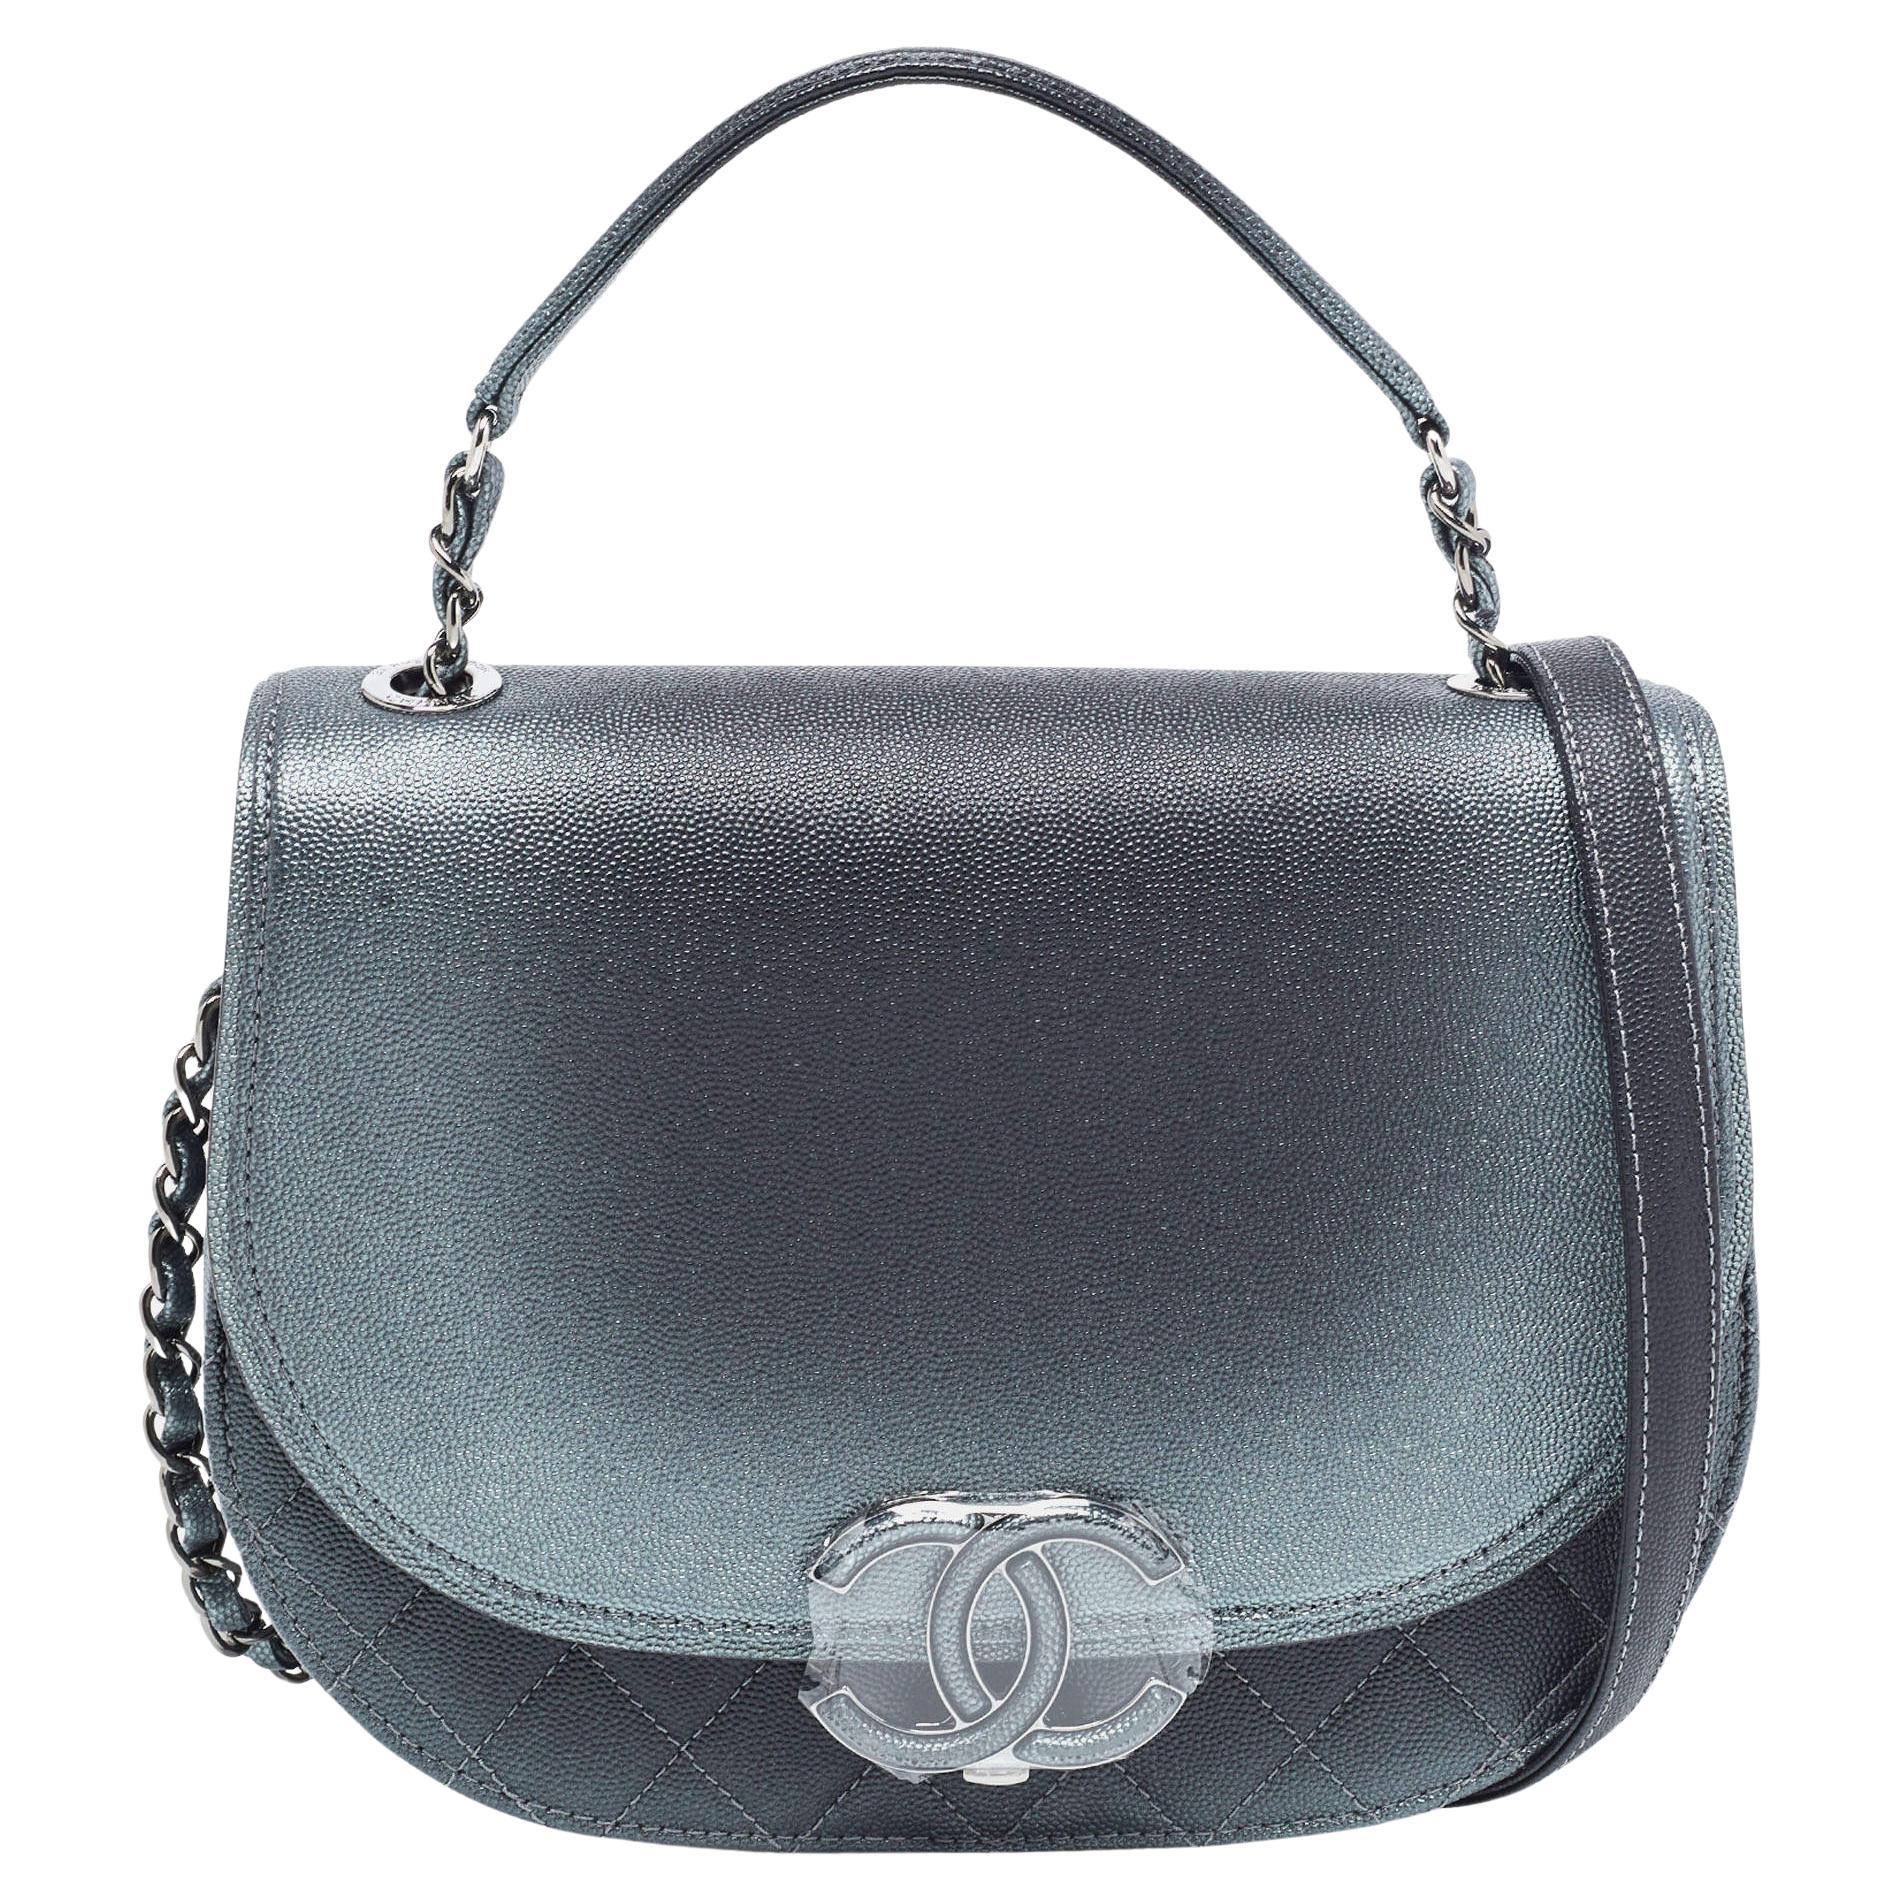 Chanel Metallic Grey Ombre Quilted Caviar Leather Coco Curve Flap Bag